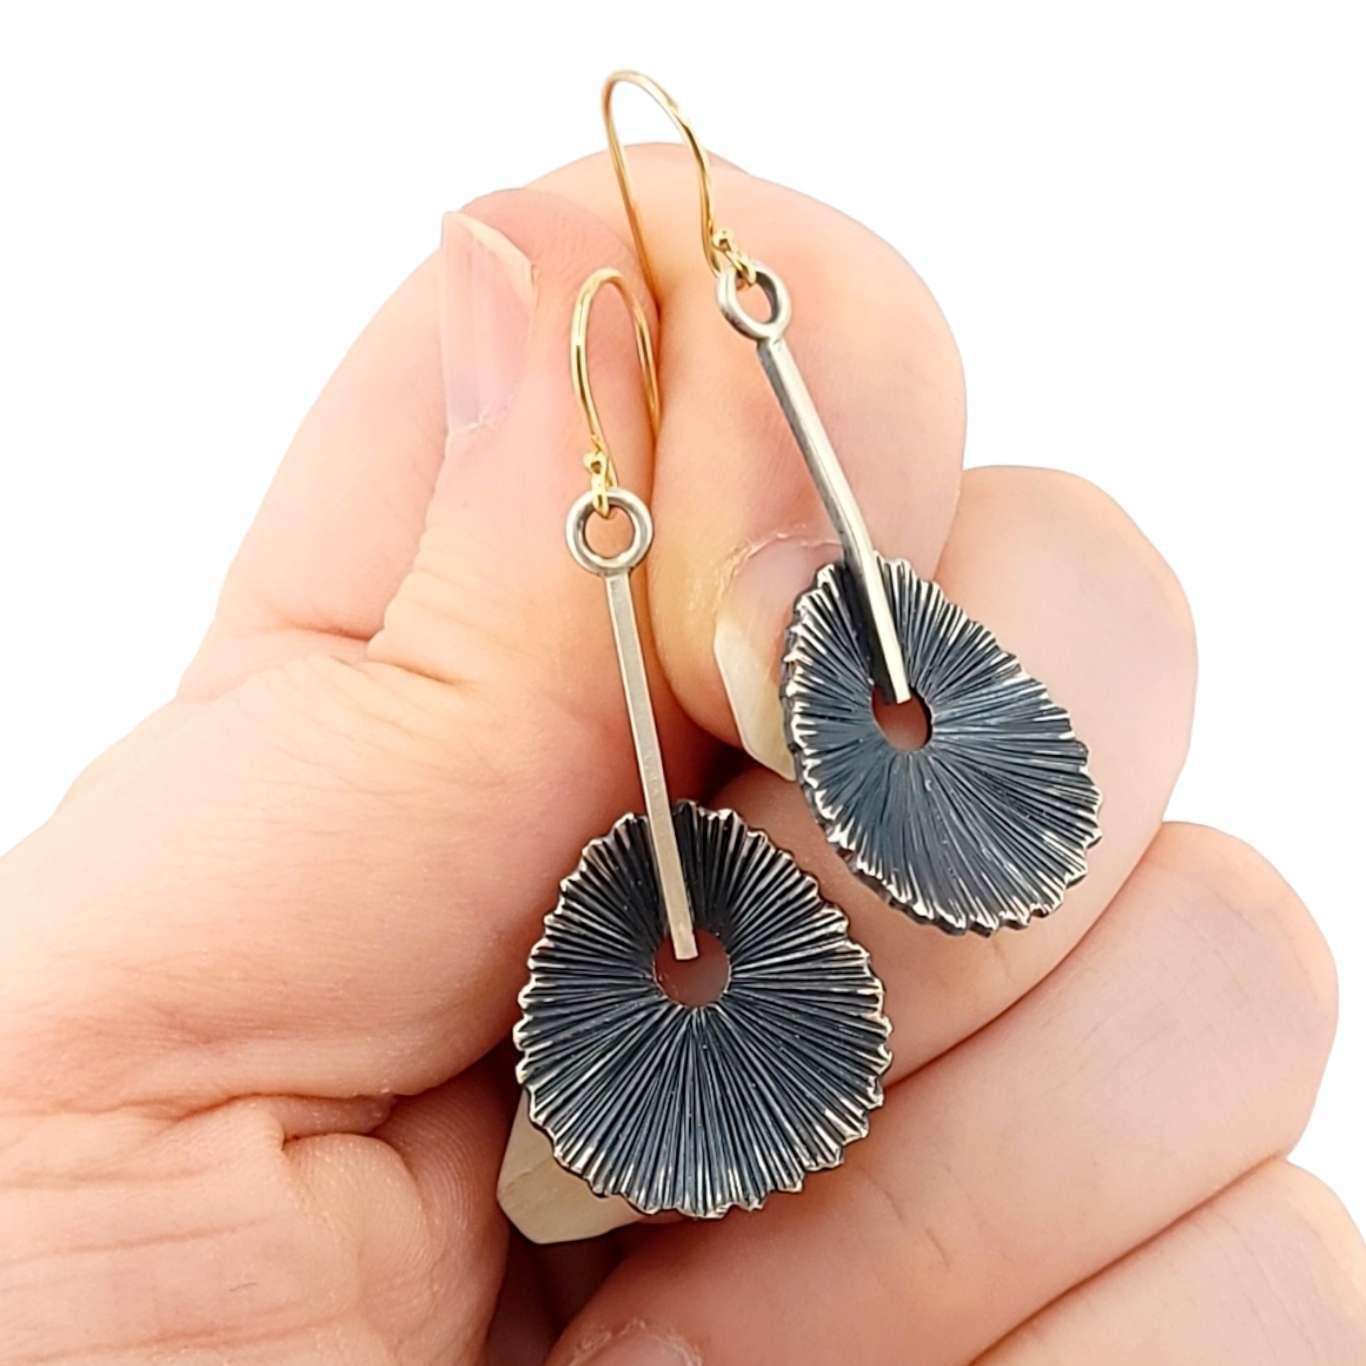 Earrings - Textured Scoop Drops in Sterling Silver and 14k Gold by Susan Mahlstedt